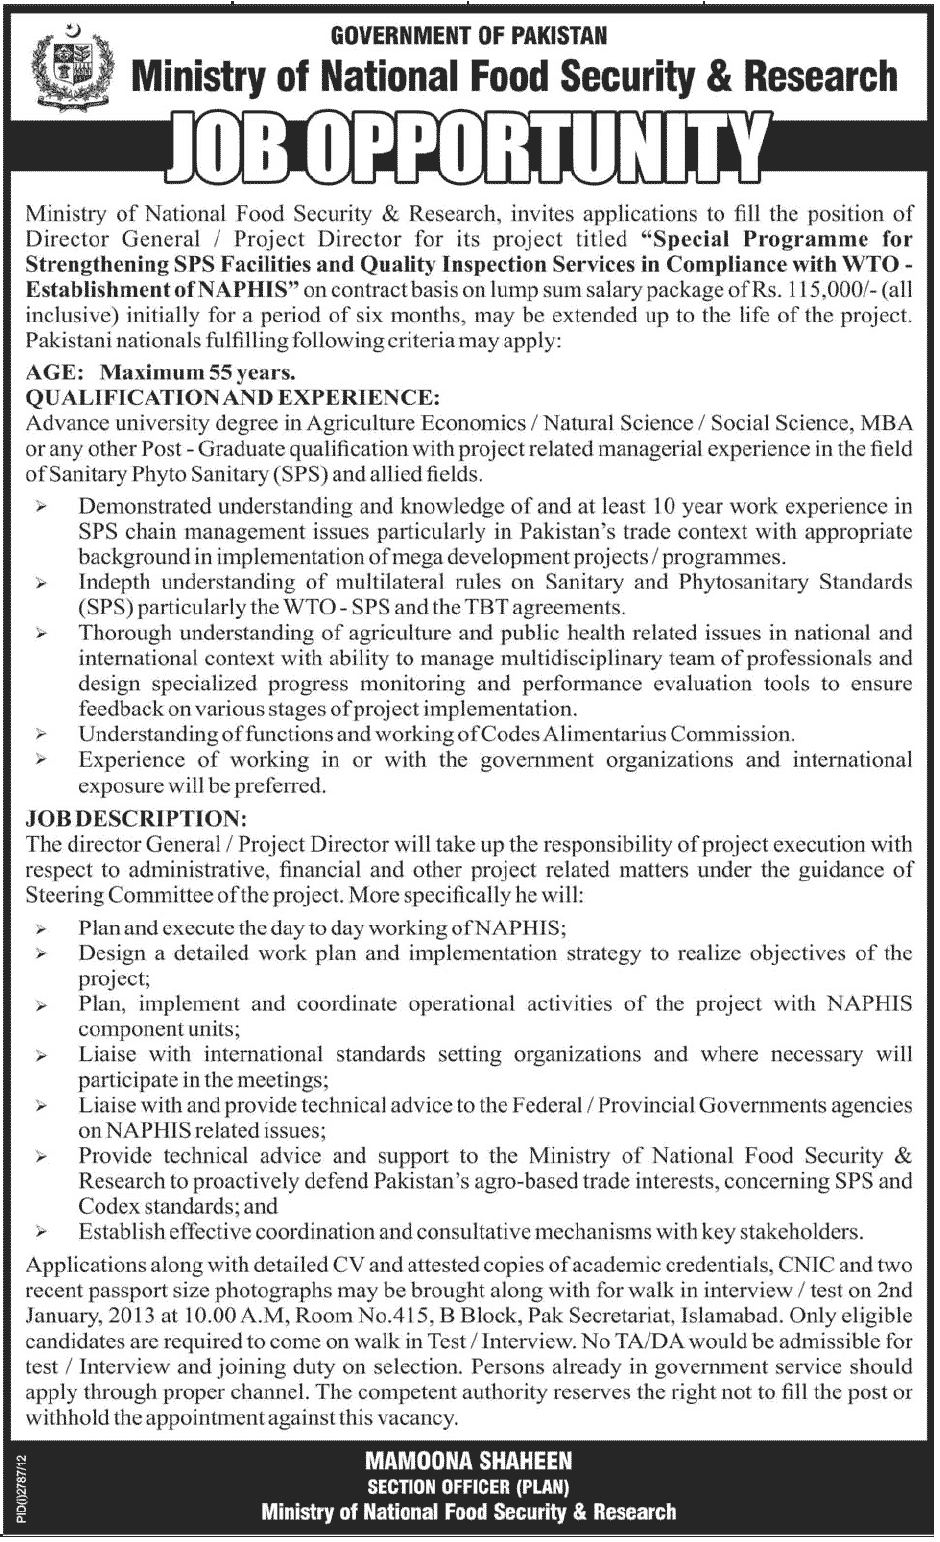 Director General / Project Director Job at Ministry of National Food Security & Research